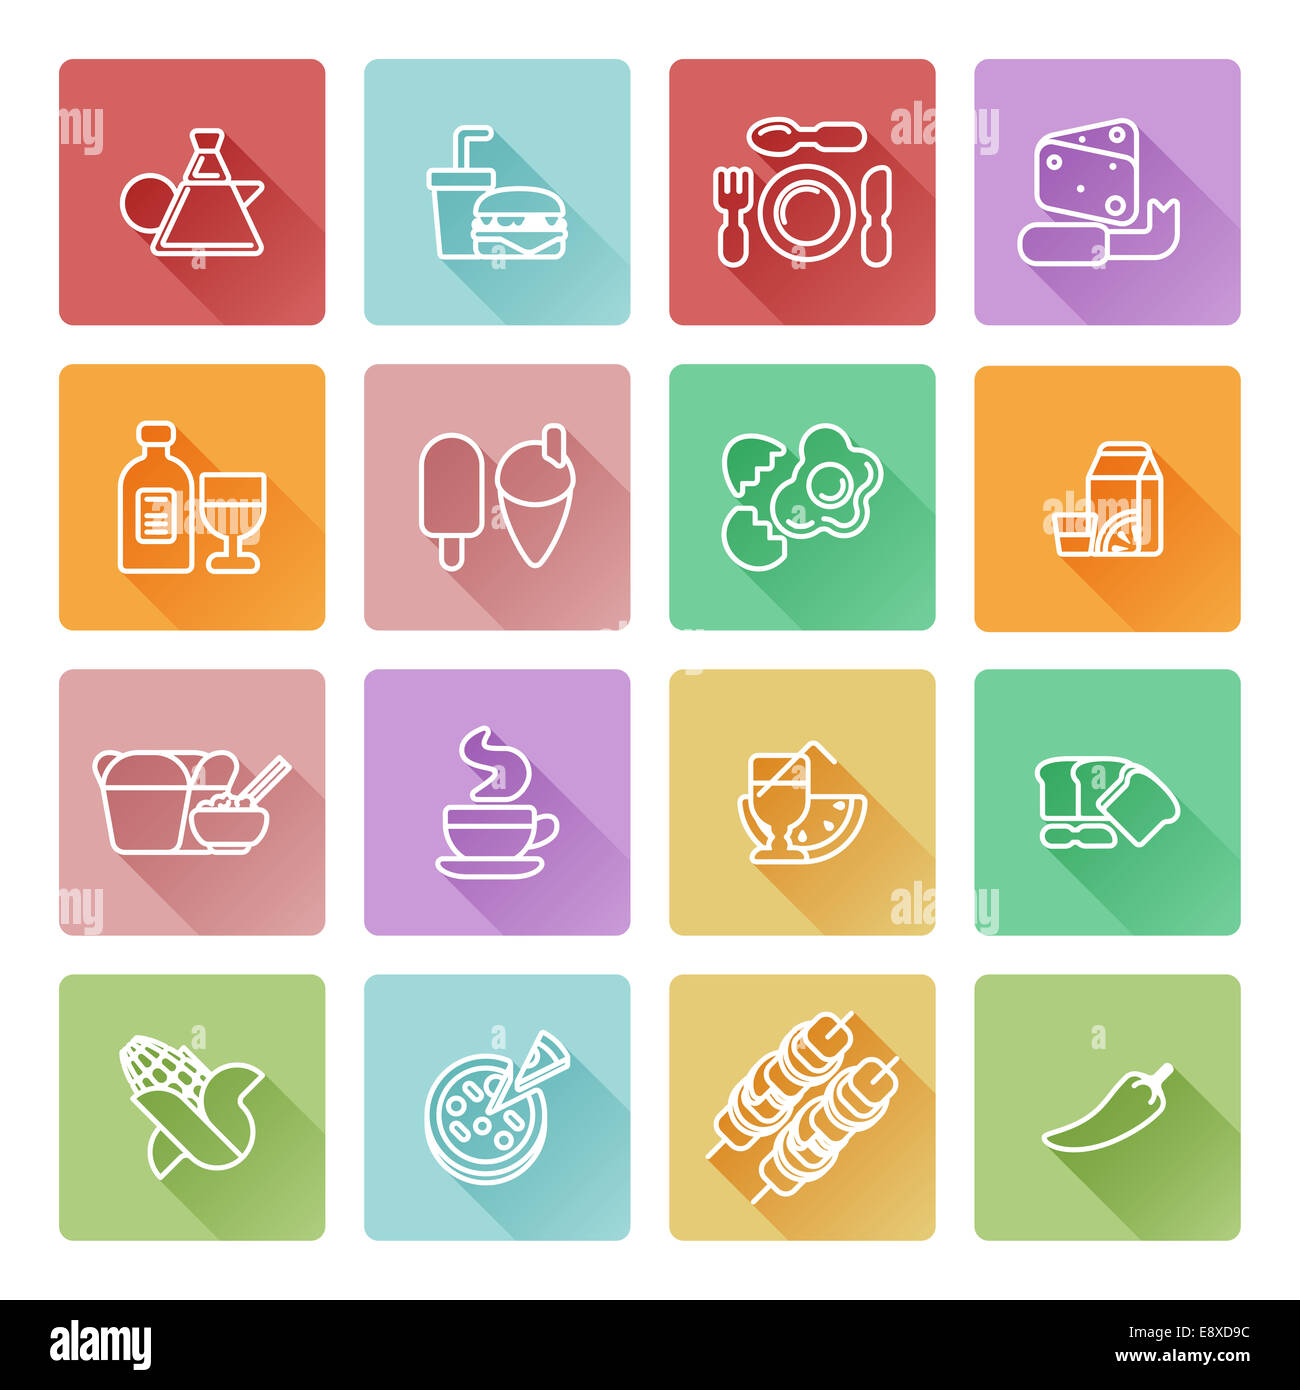 Food icon set great for restaurant or guides and similar. Including icons for burger, Chinese food, pizza, coffee and many more Stock Photo